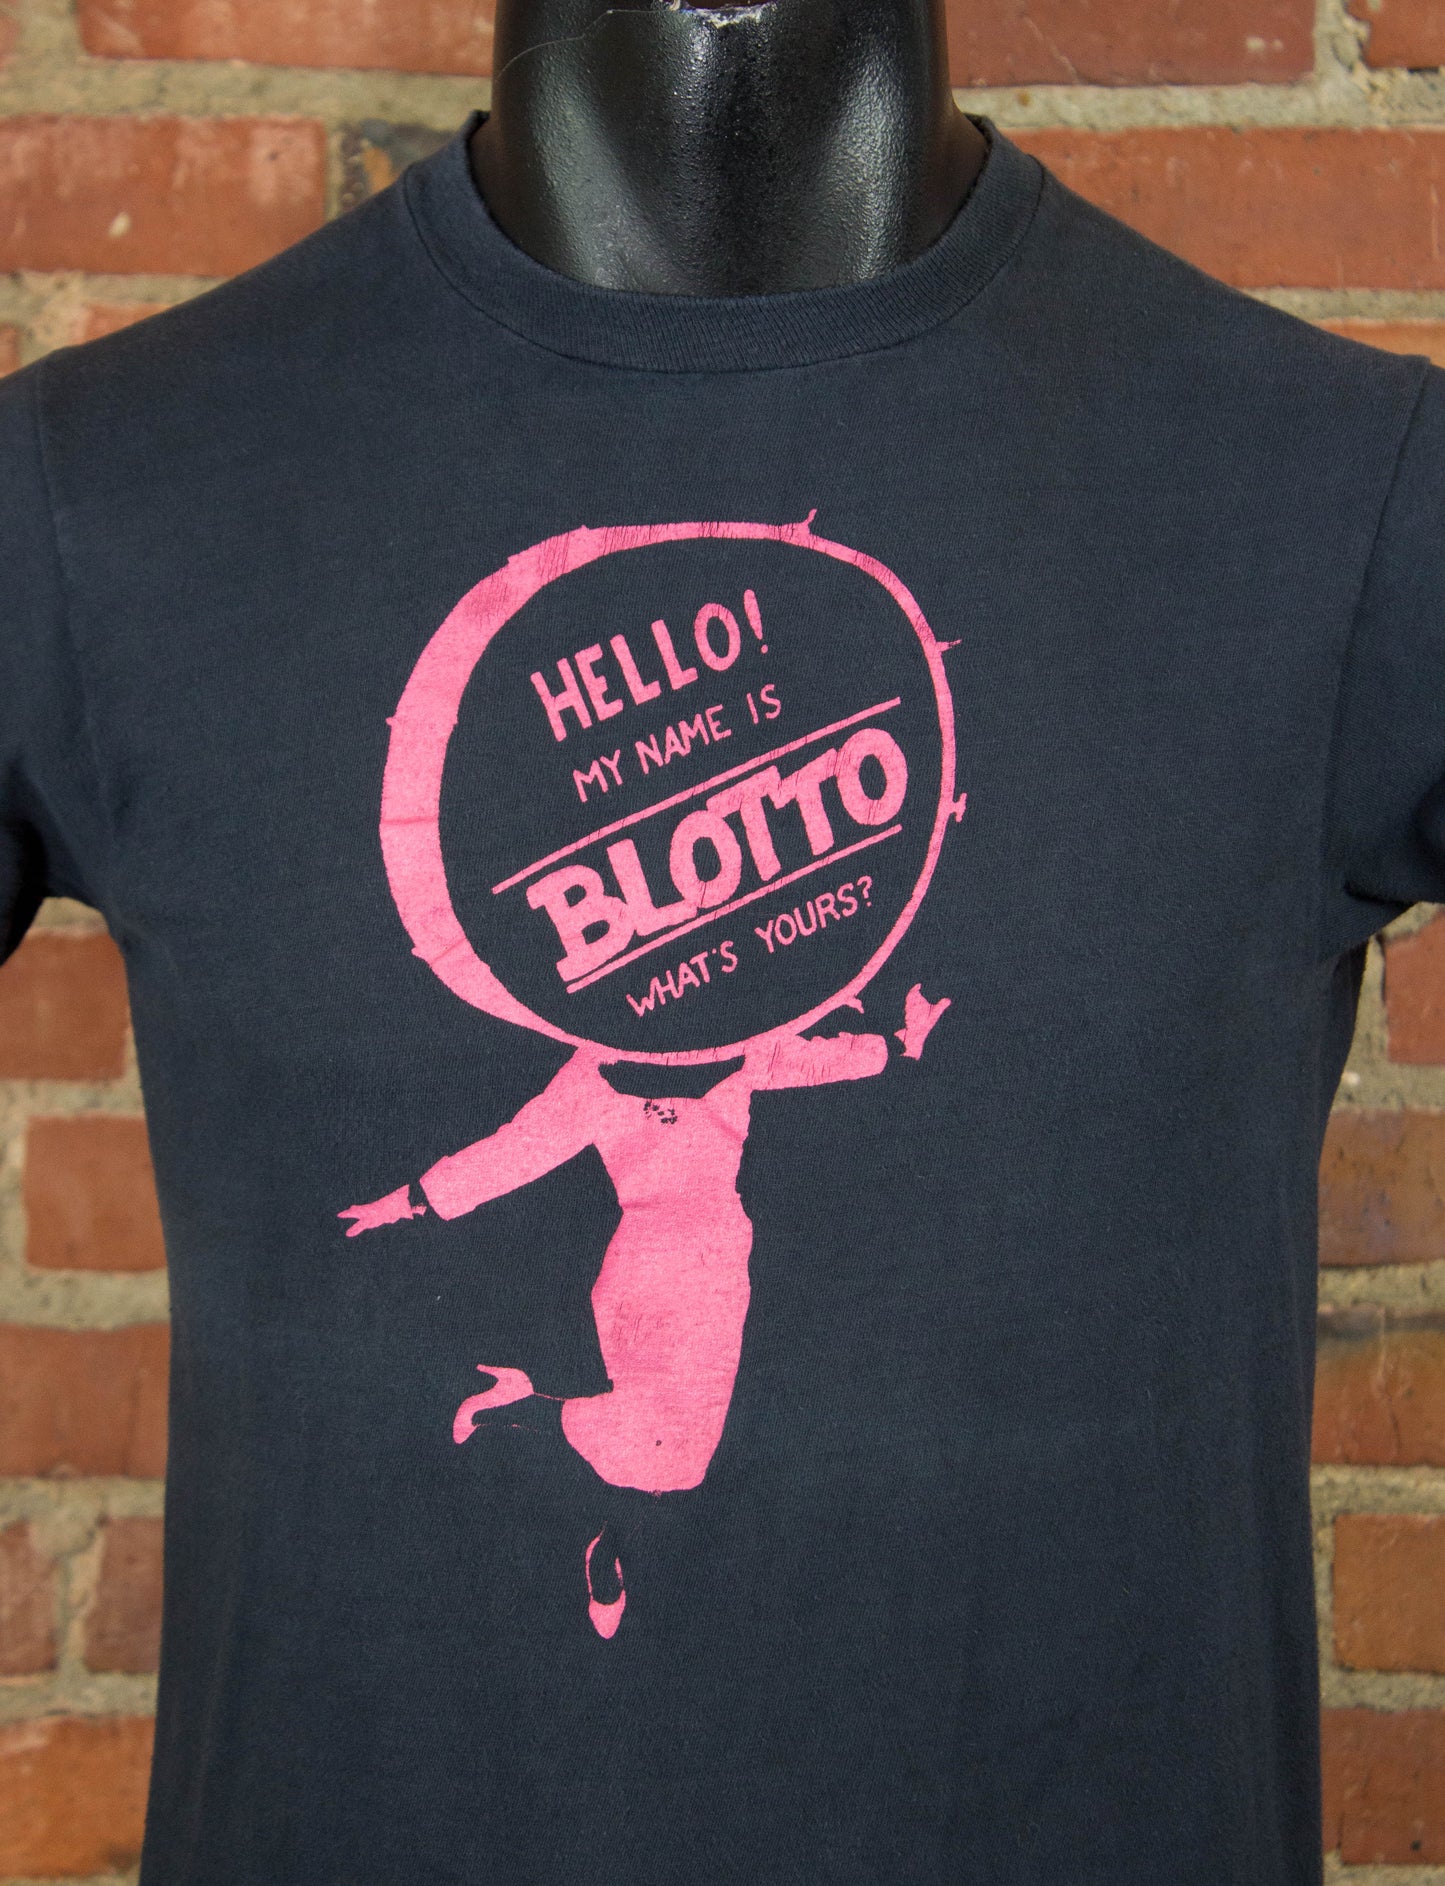 Vintage 1979 Hello! My Name is Blotto What's Yours? Black and Pink Concert T Shirt Unisex Small